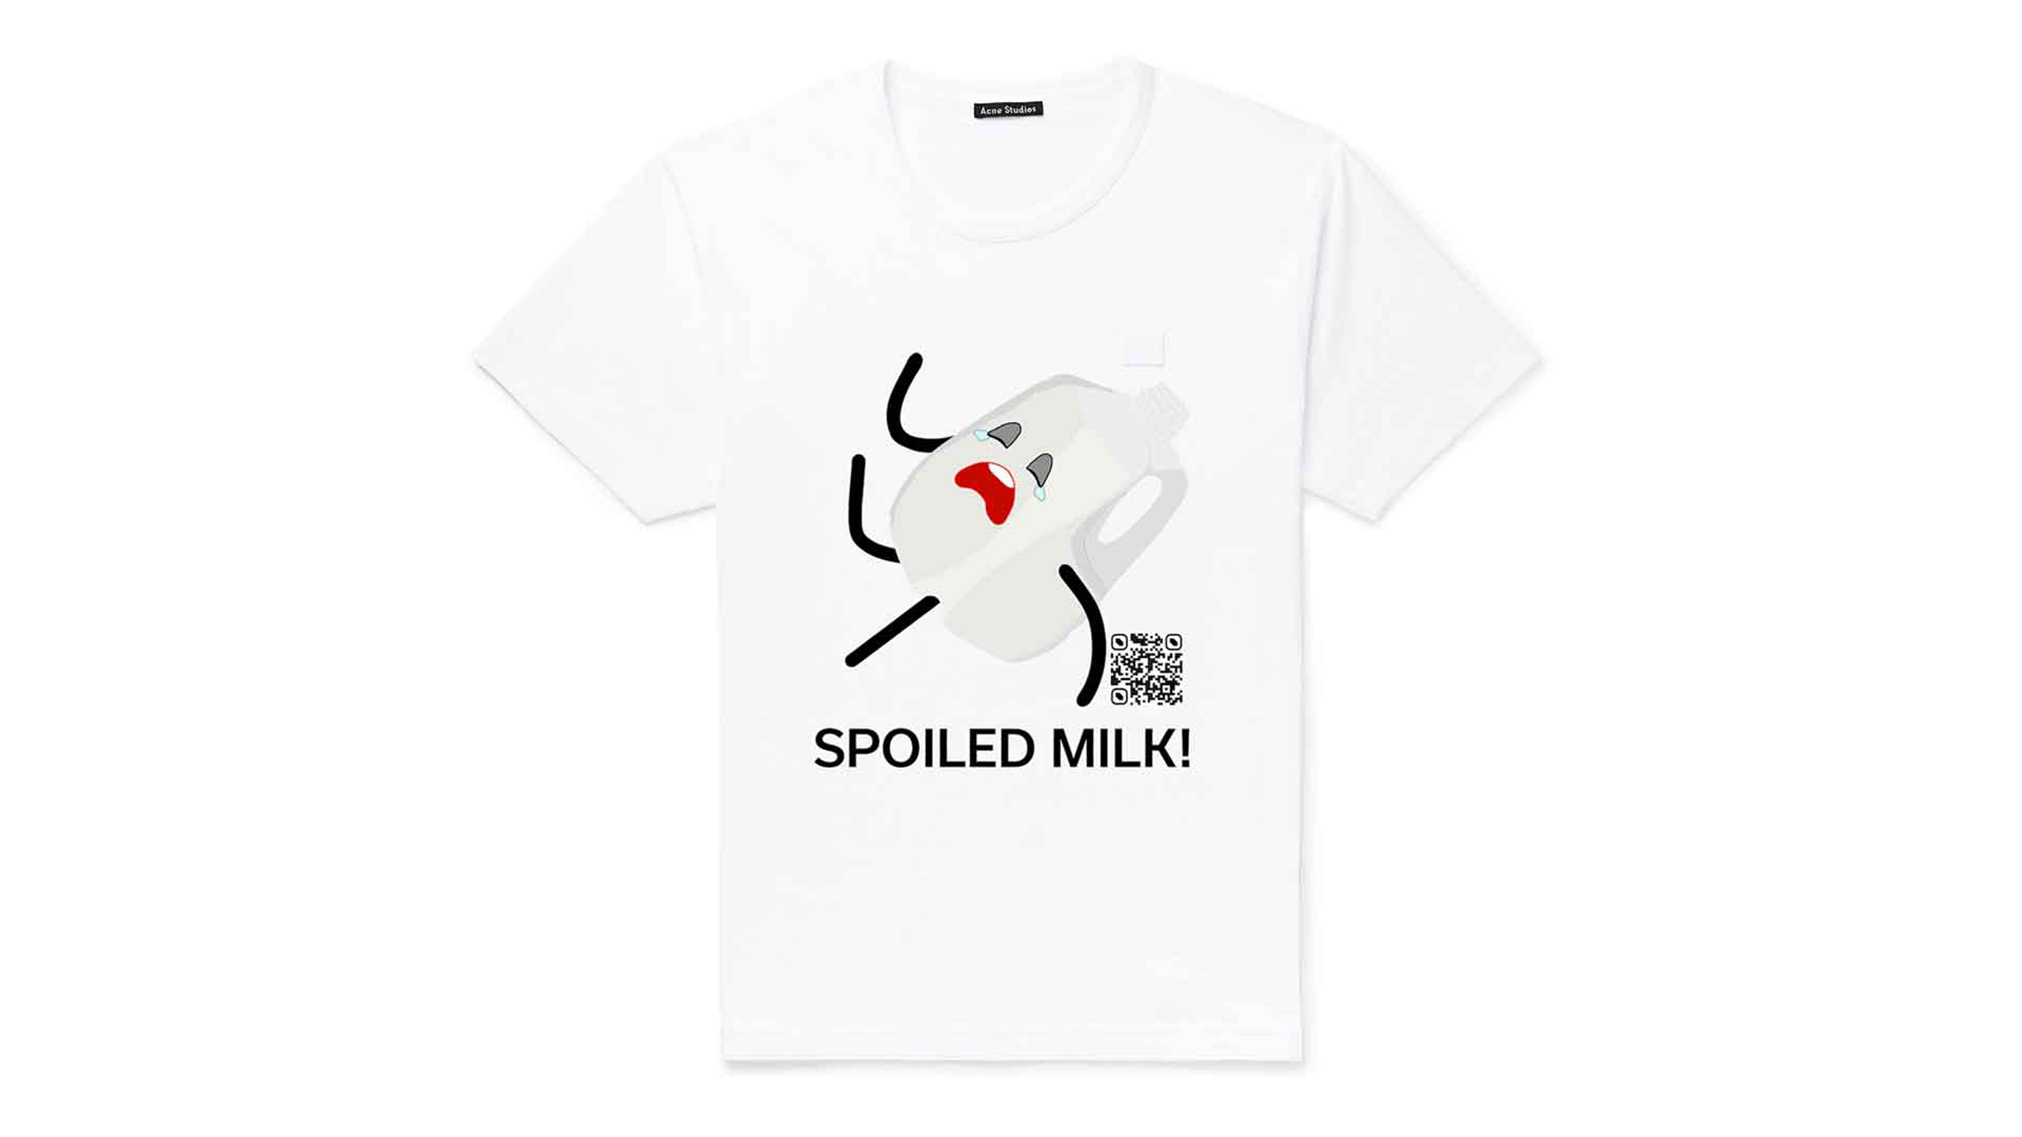 One of the Augmented Reality T-Shirts in the passion project. This pun consists of some milk past its due date having a tantrum.
